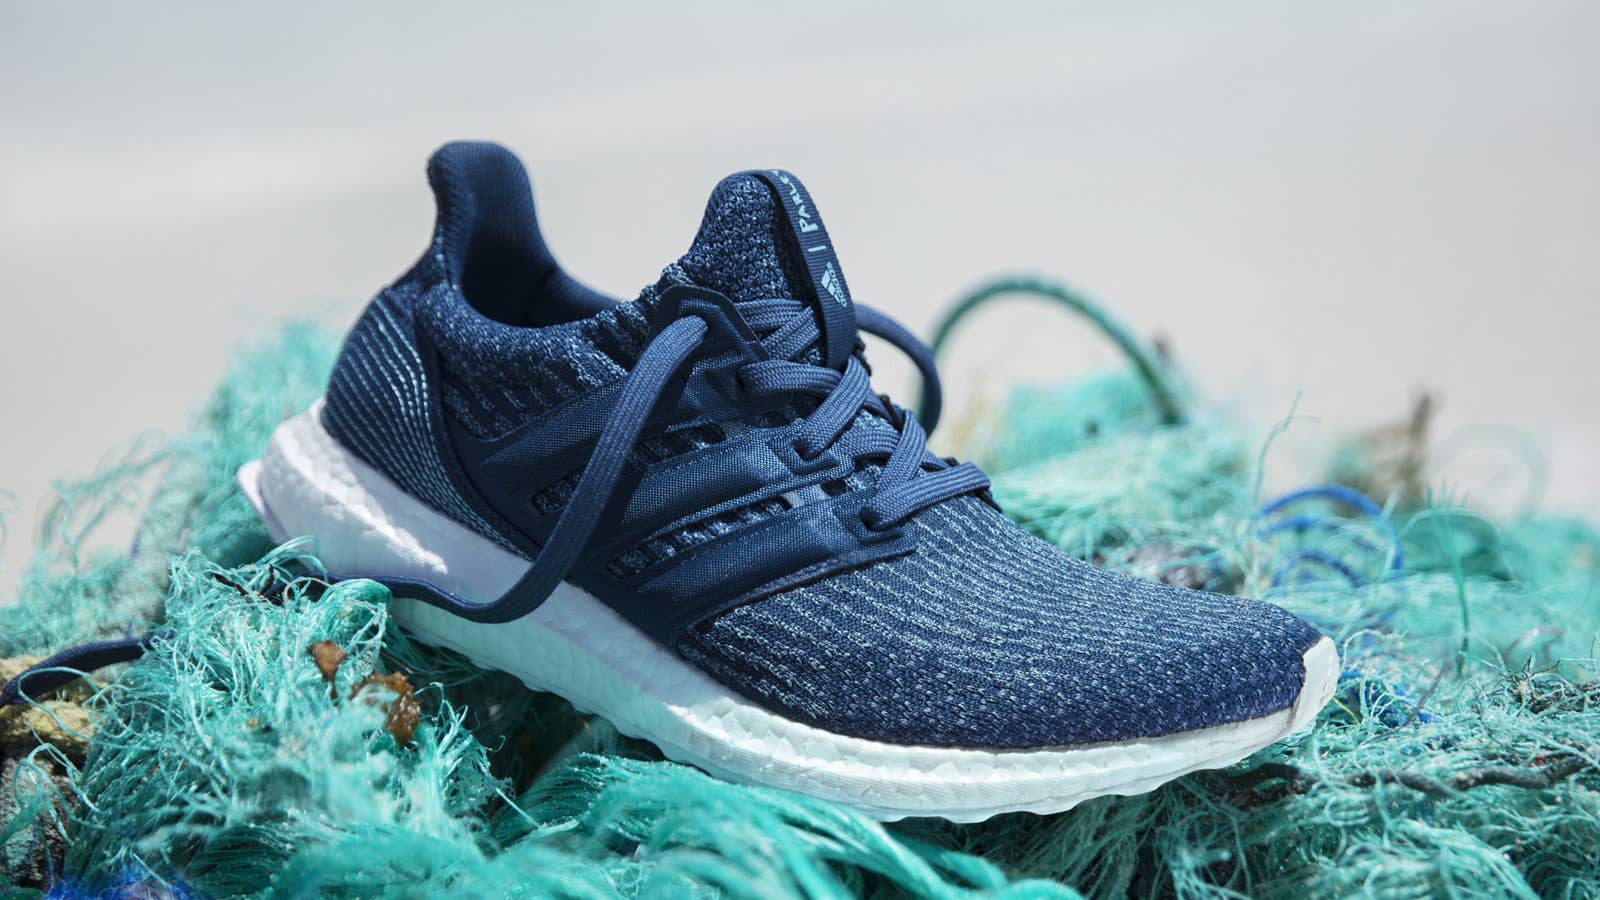 Adidas and Parley Launching new editions of Ultra Boost